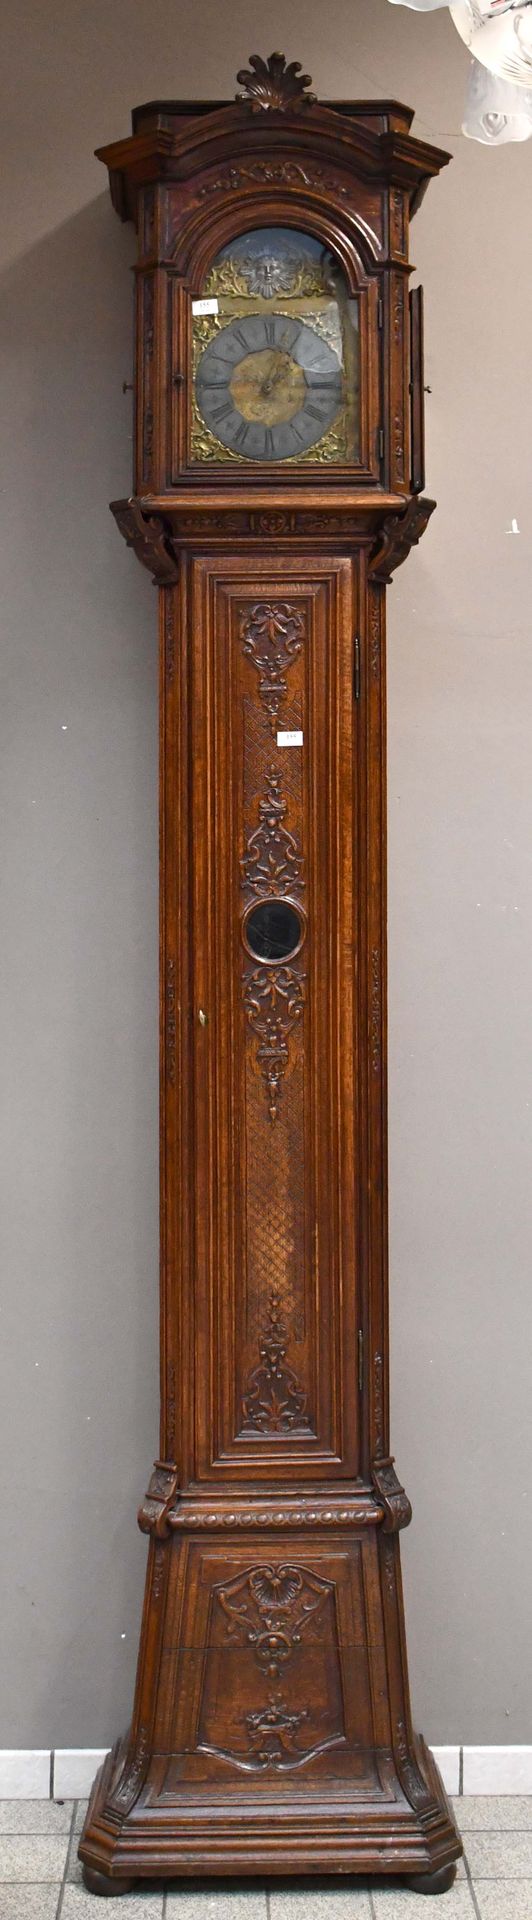 Null Fine Liège parquet clock in carved oak in the Regency style, with cut sides